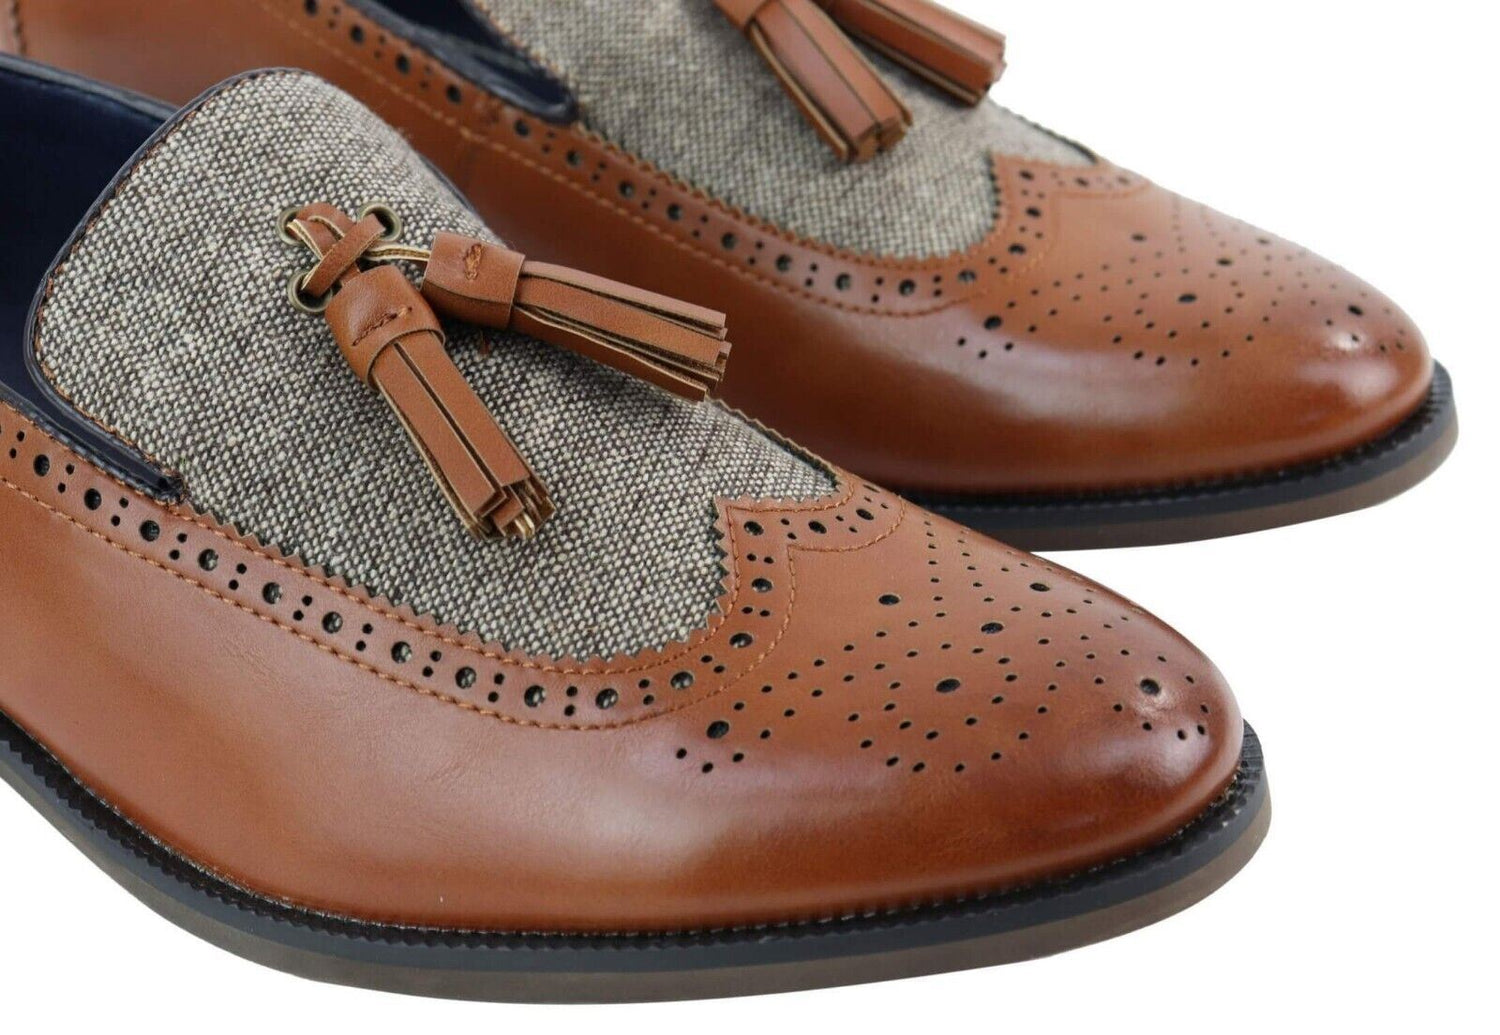 Mens Tasselled Tan Leather Tweed Slip on Loafers - Upperclass Fashions 